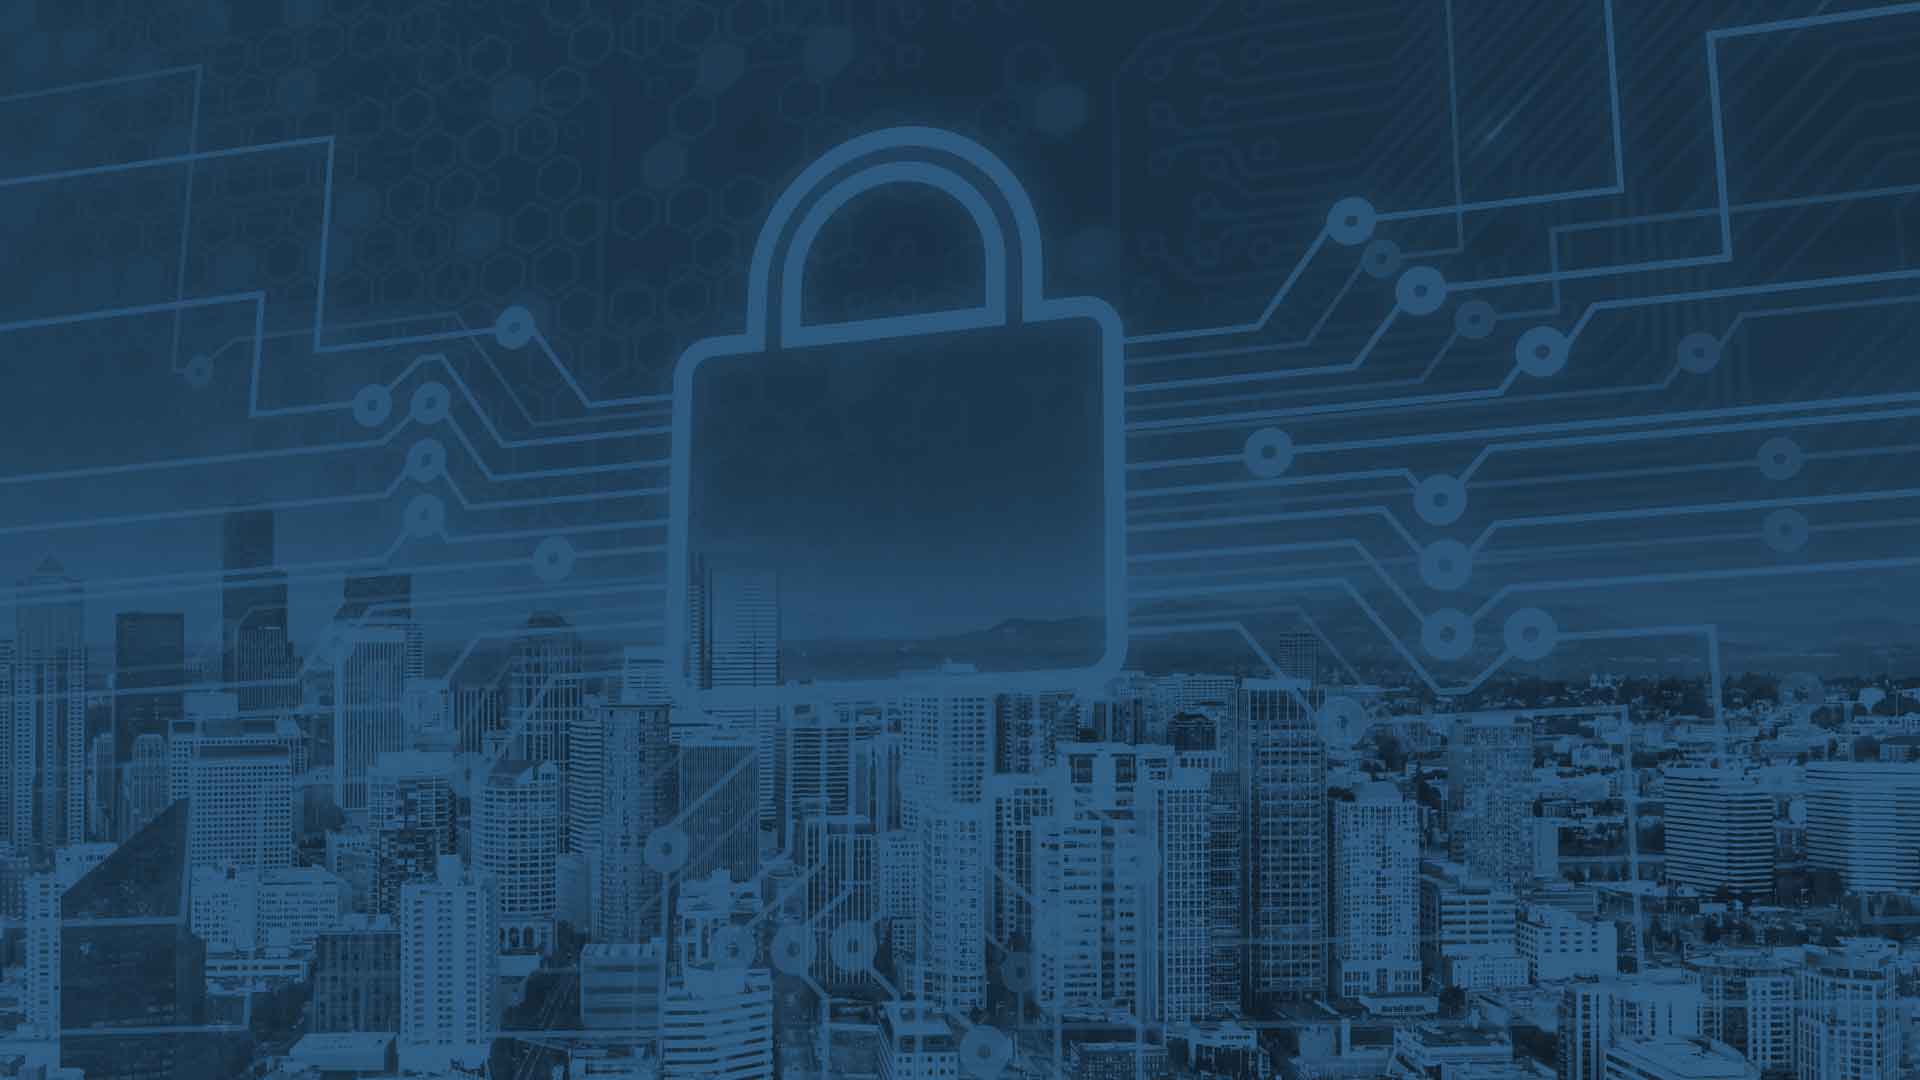 Secure building graphic